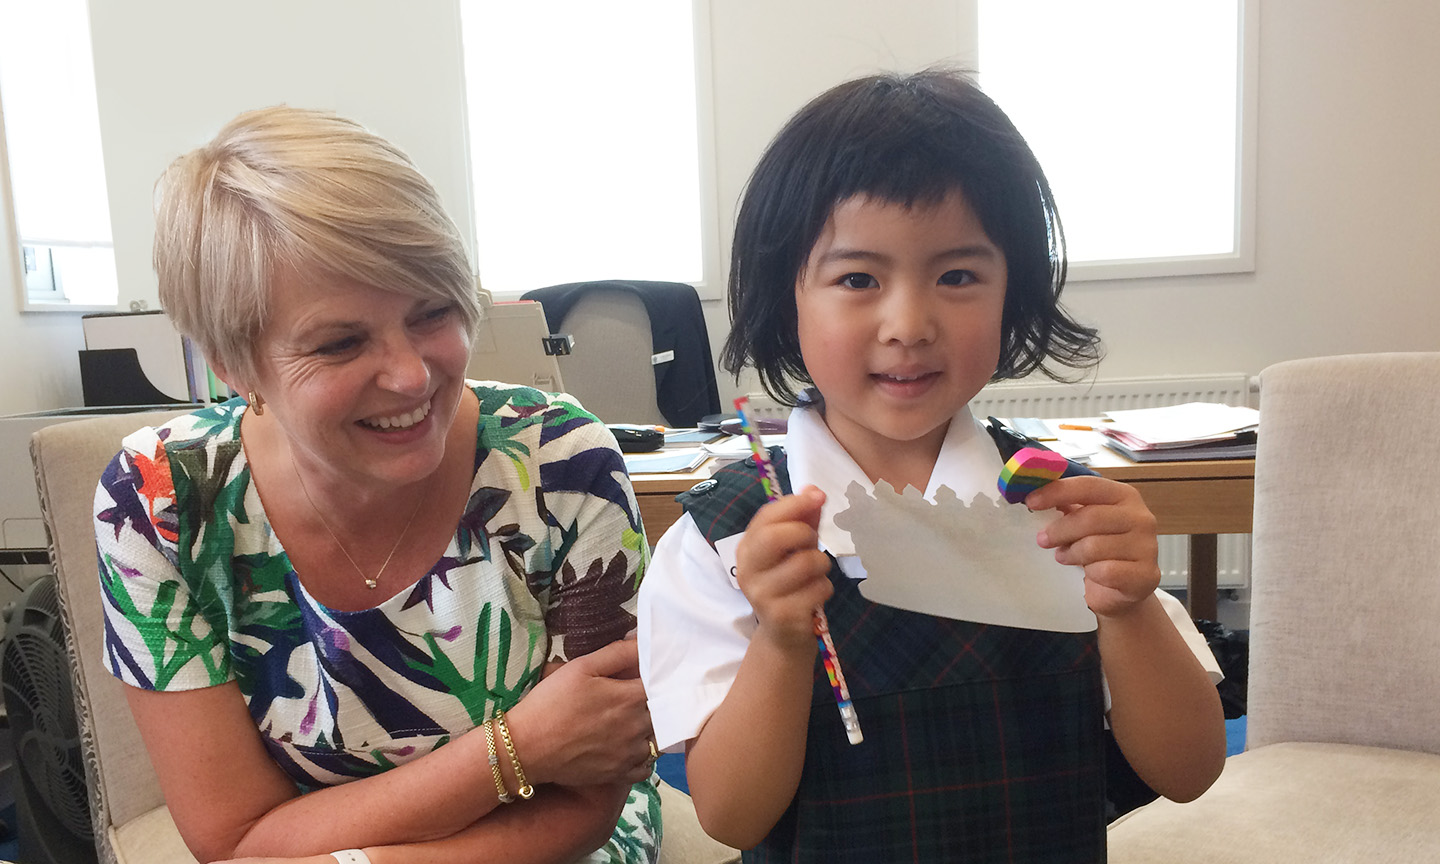 IMG_9257-Narelle and Primary student-EDIT.jpg